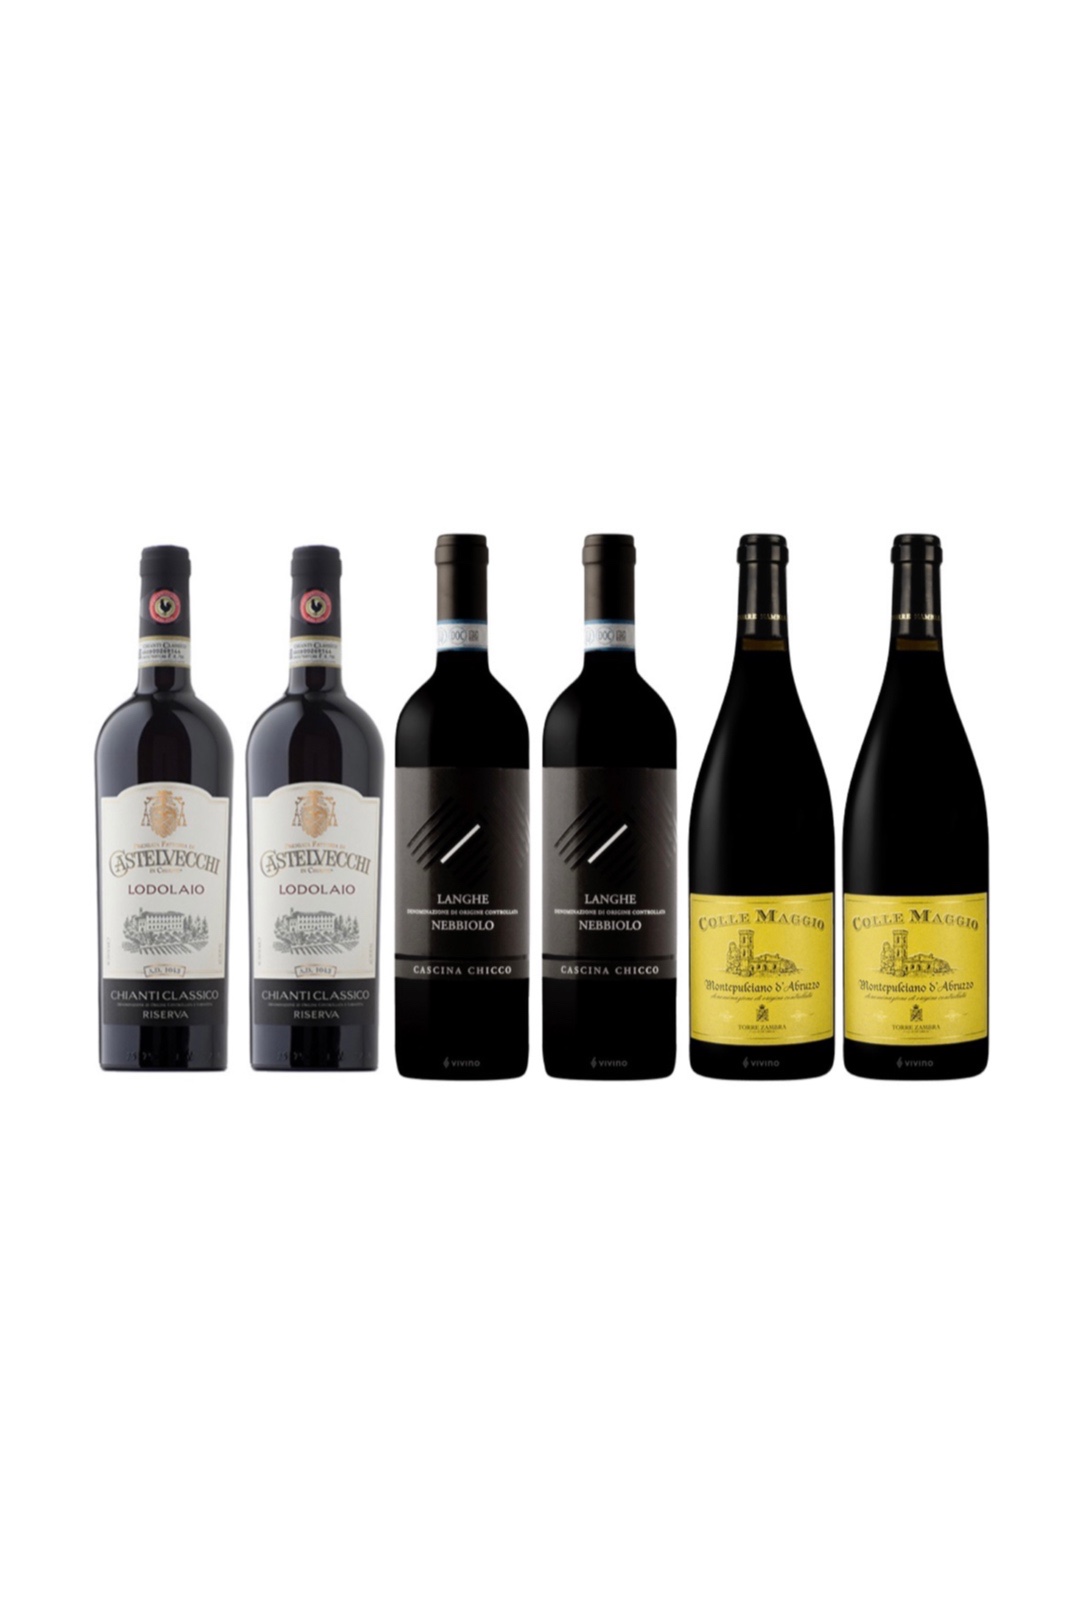 6 Bottles of Italian Wine (UP $330) and get Free Set of 12 Wine Glass OR Decanter with 2 Wine Glass